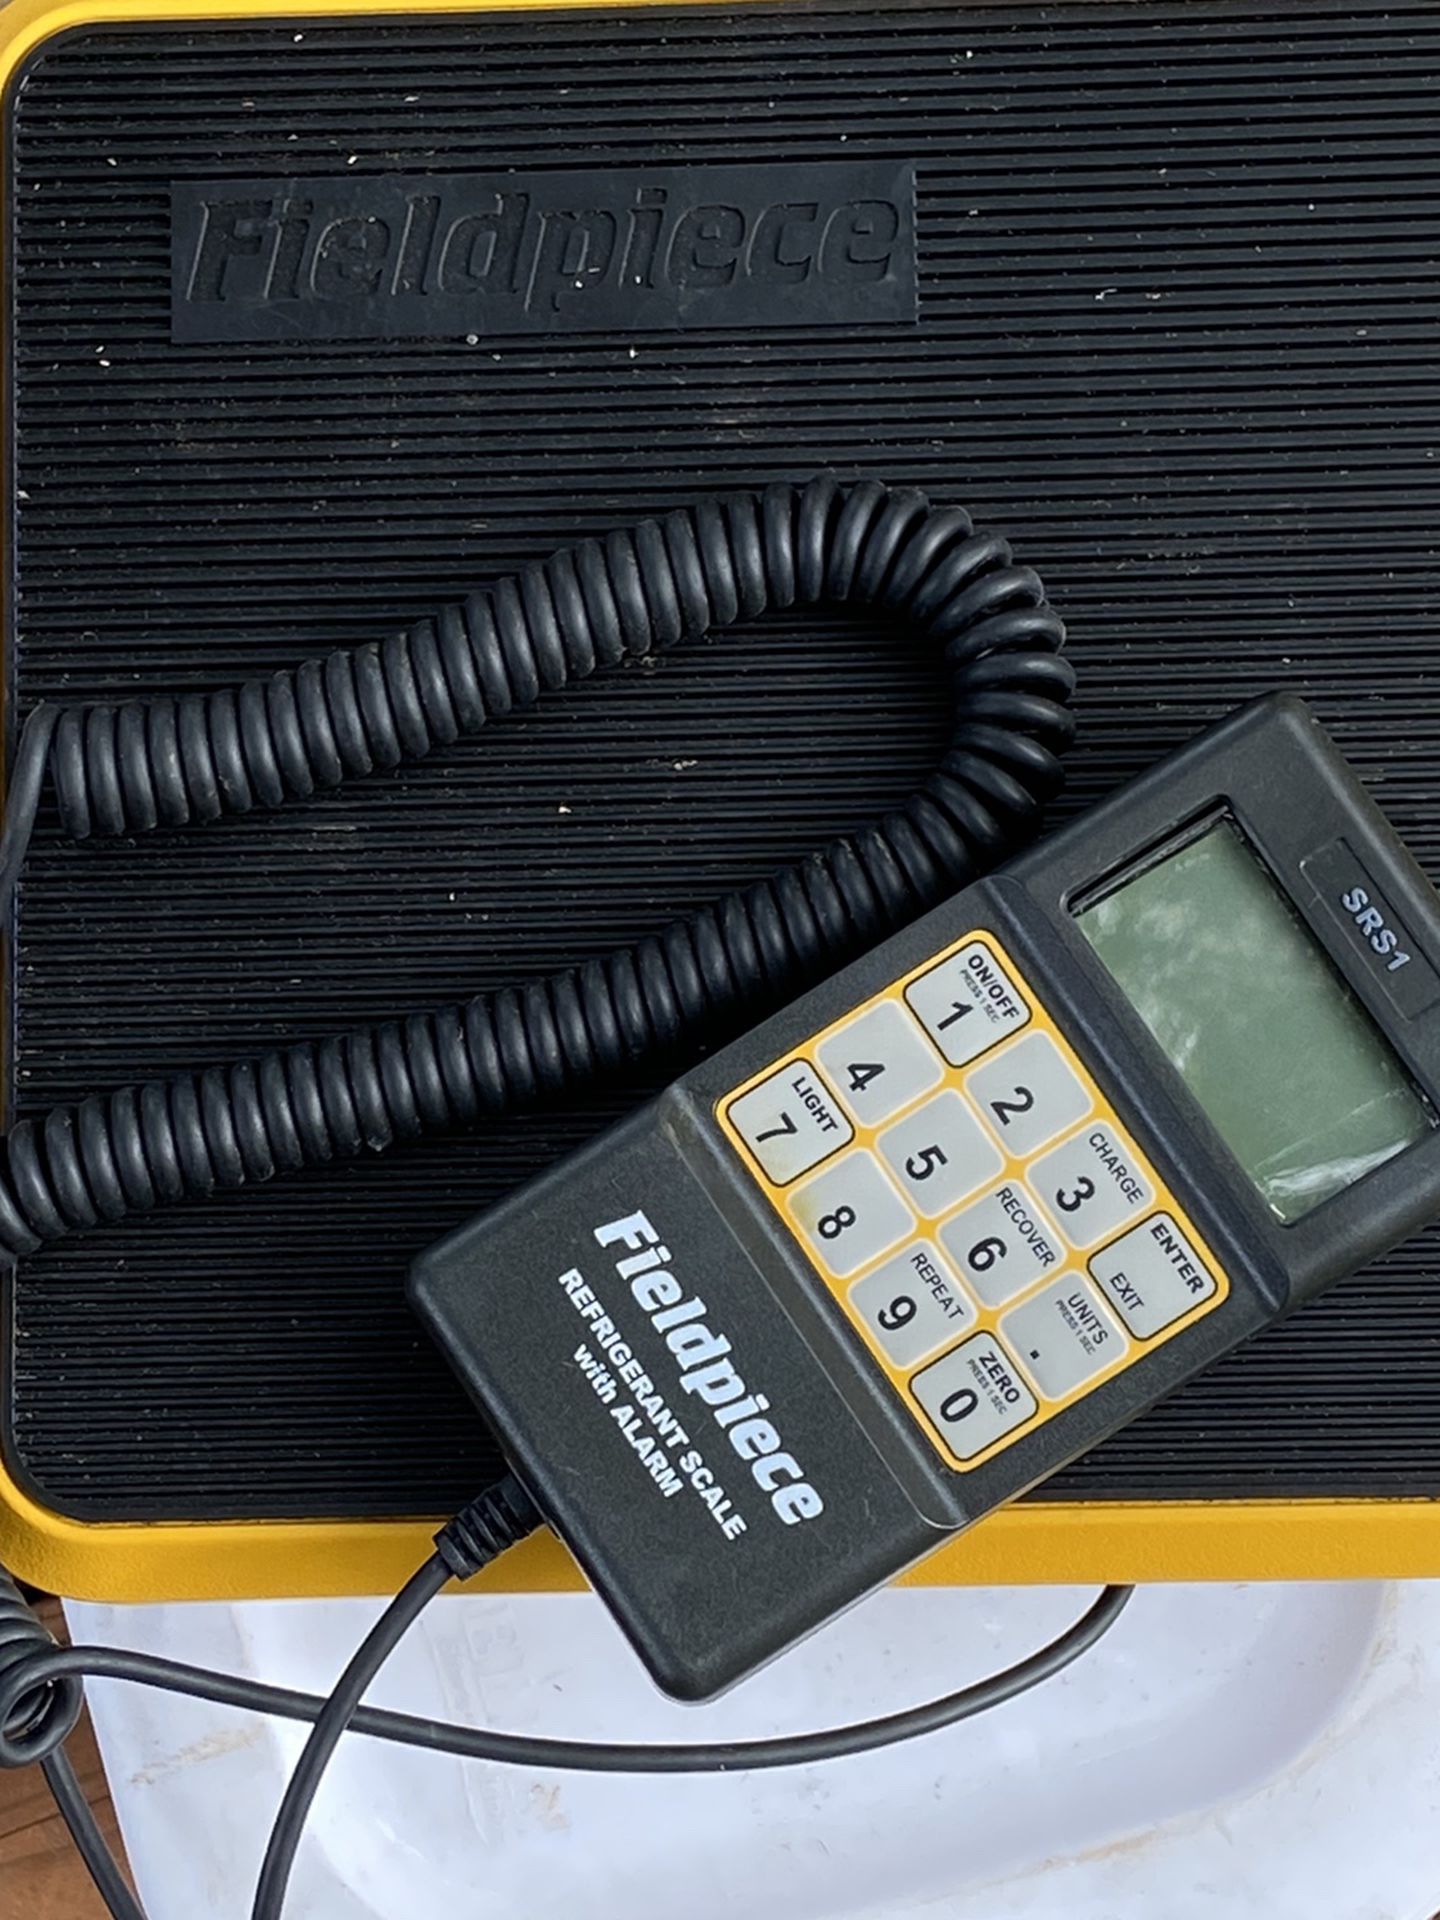 Fieldpiece Refrigerant Scale (with issues)